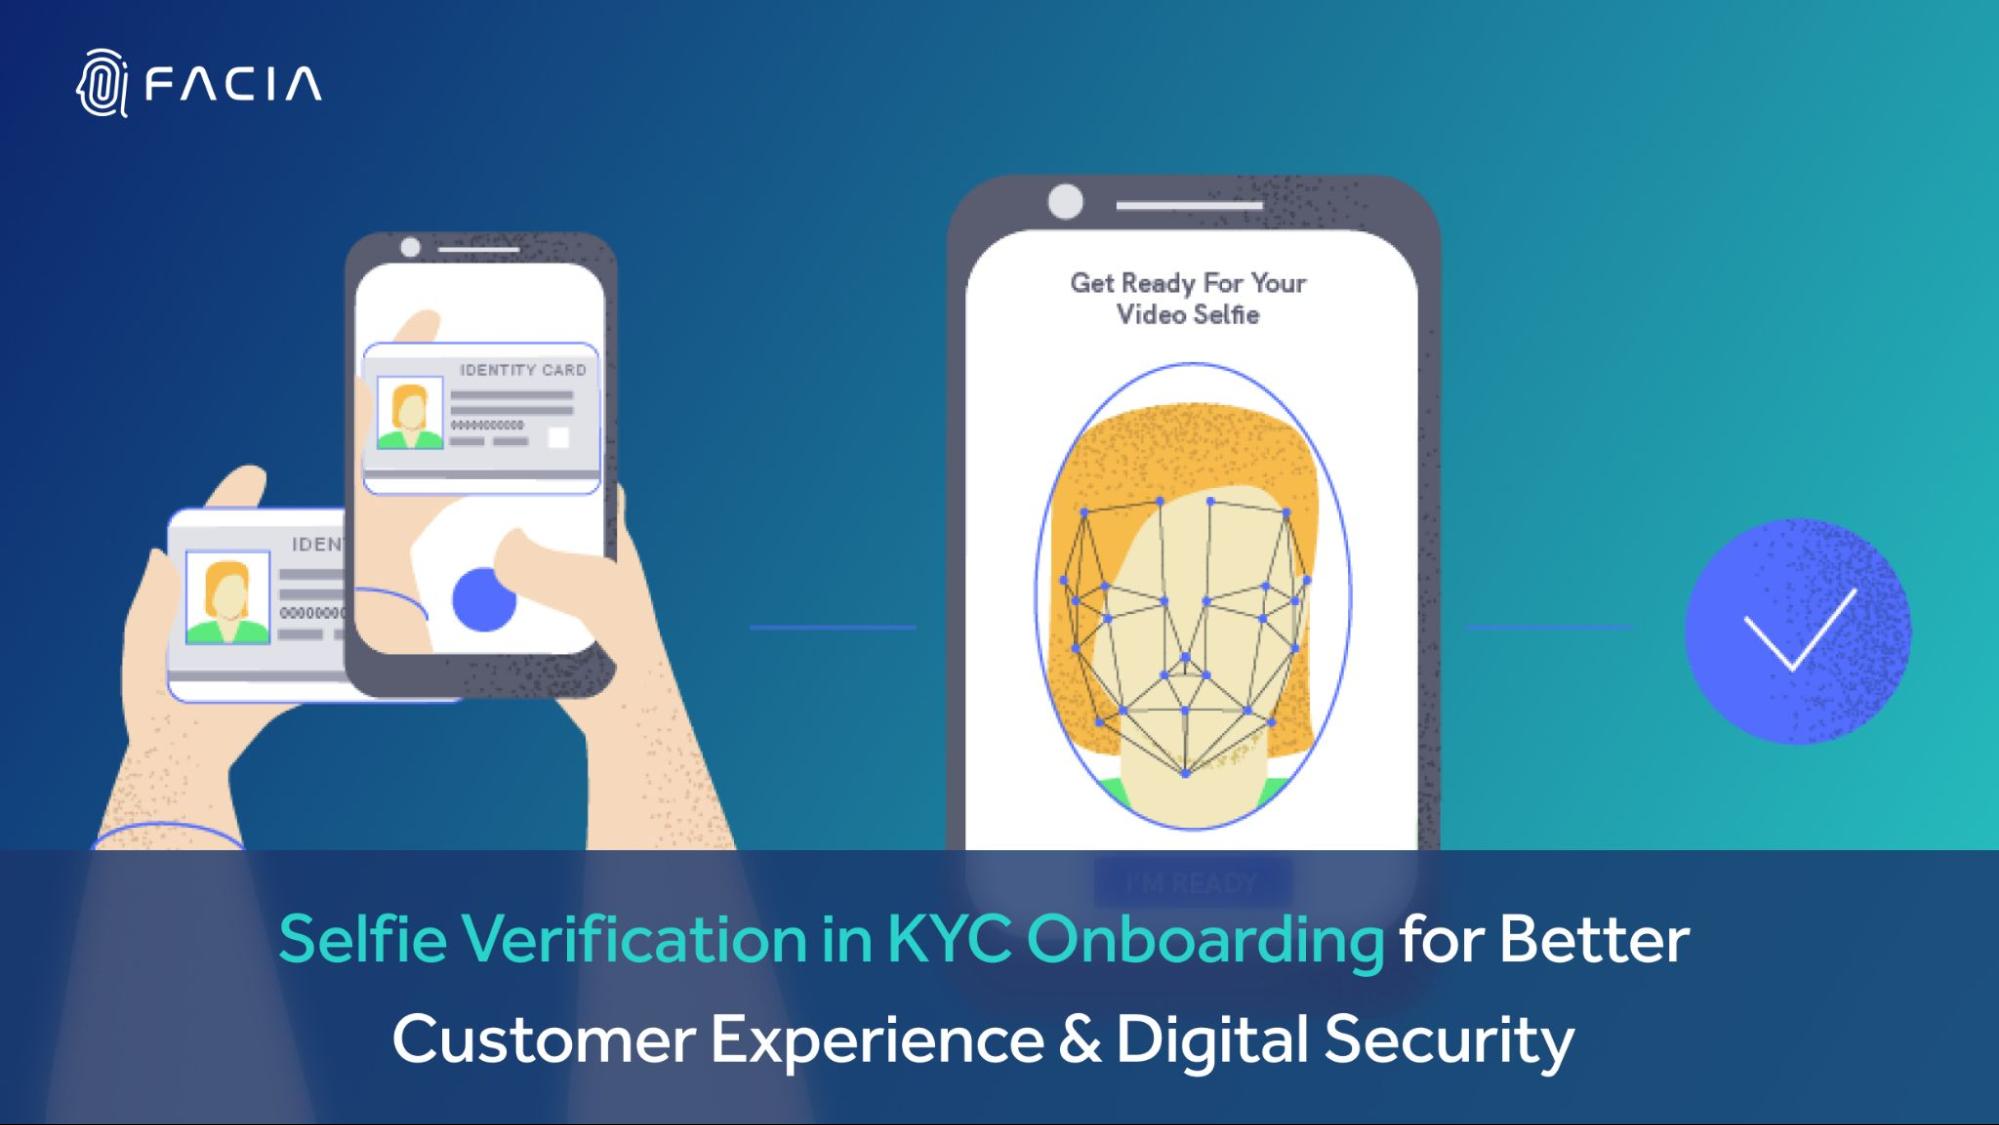 Selfie Verification in KYC Onboarding for Better Customer Experience & Digital Security